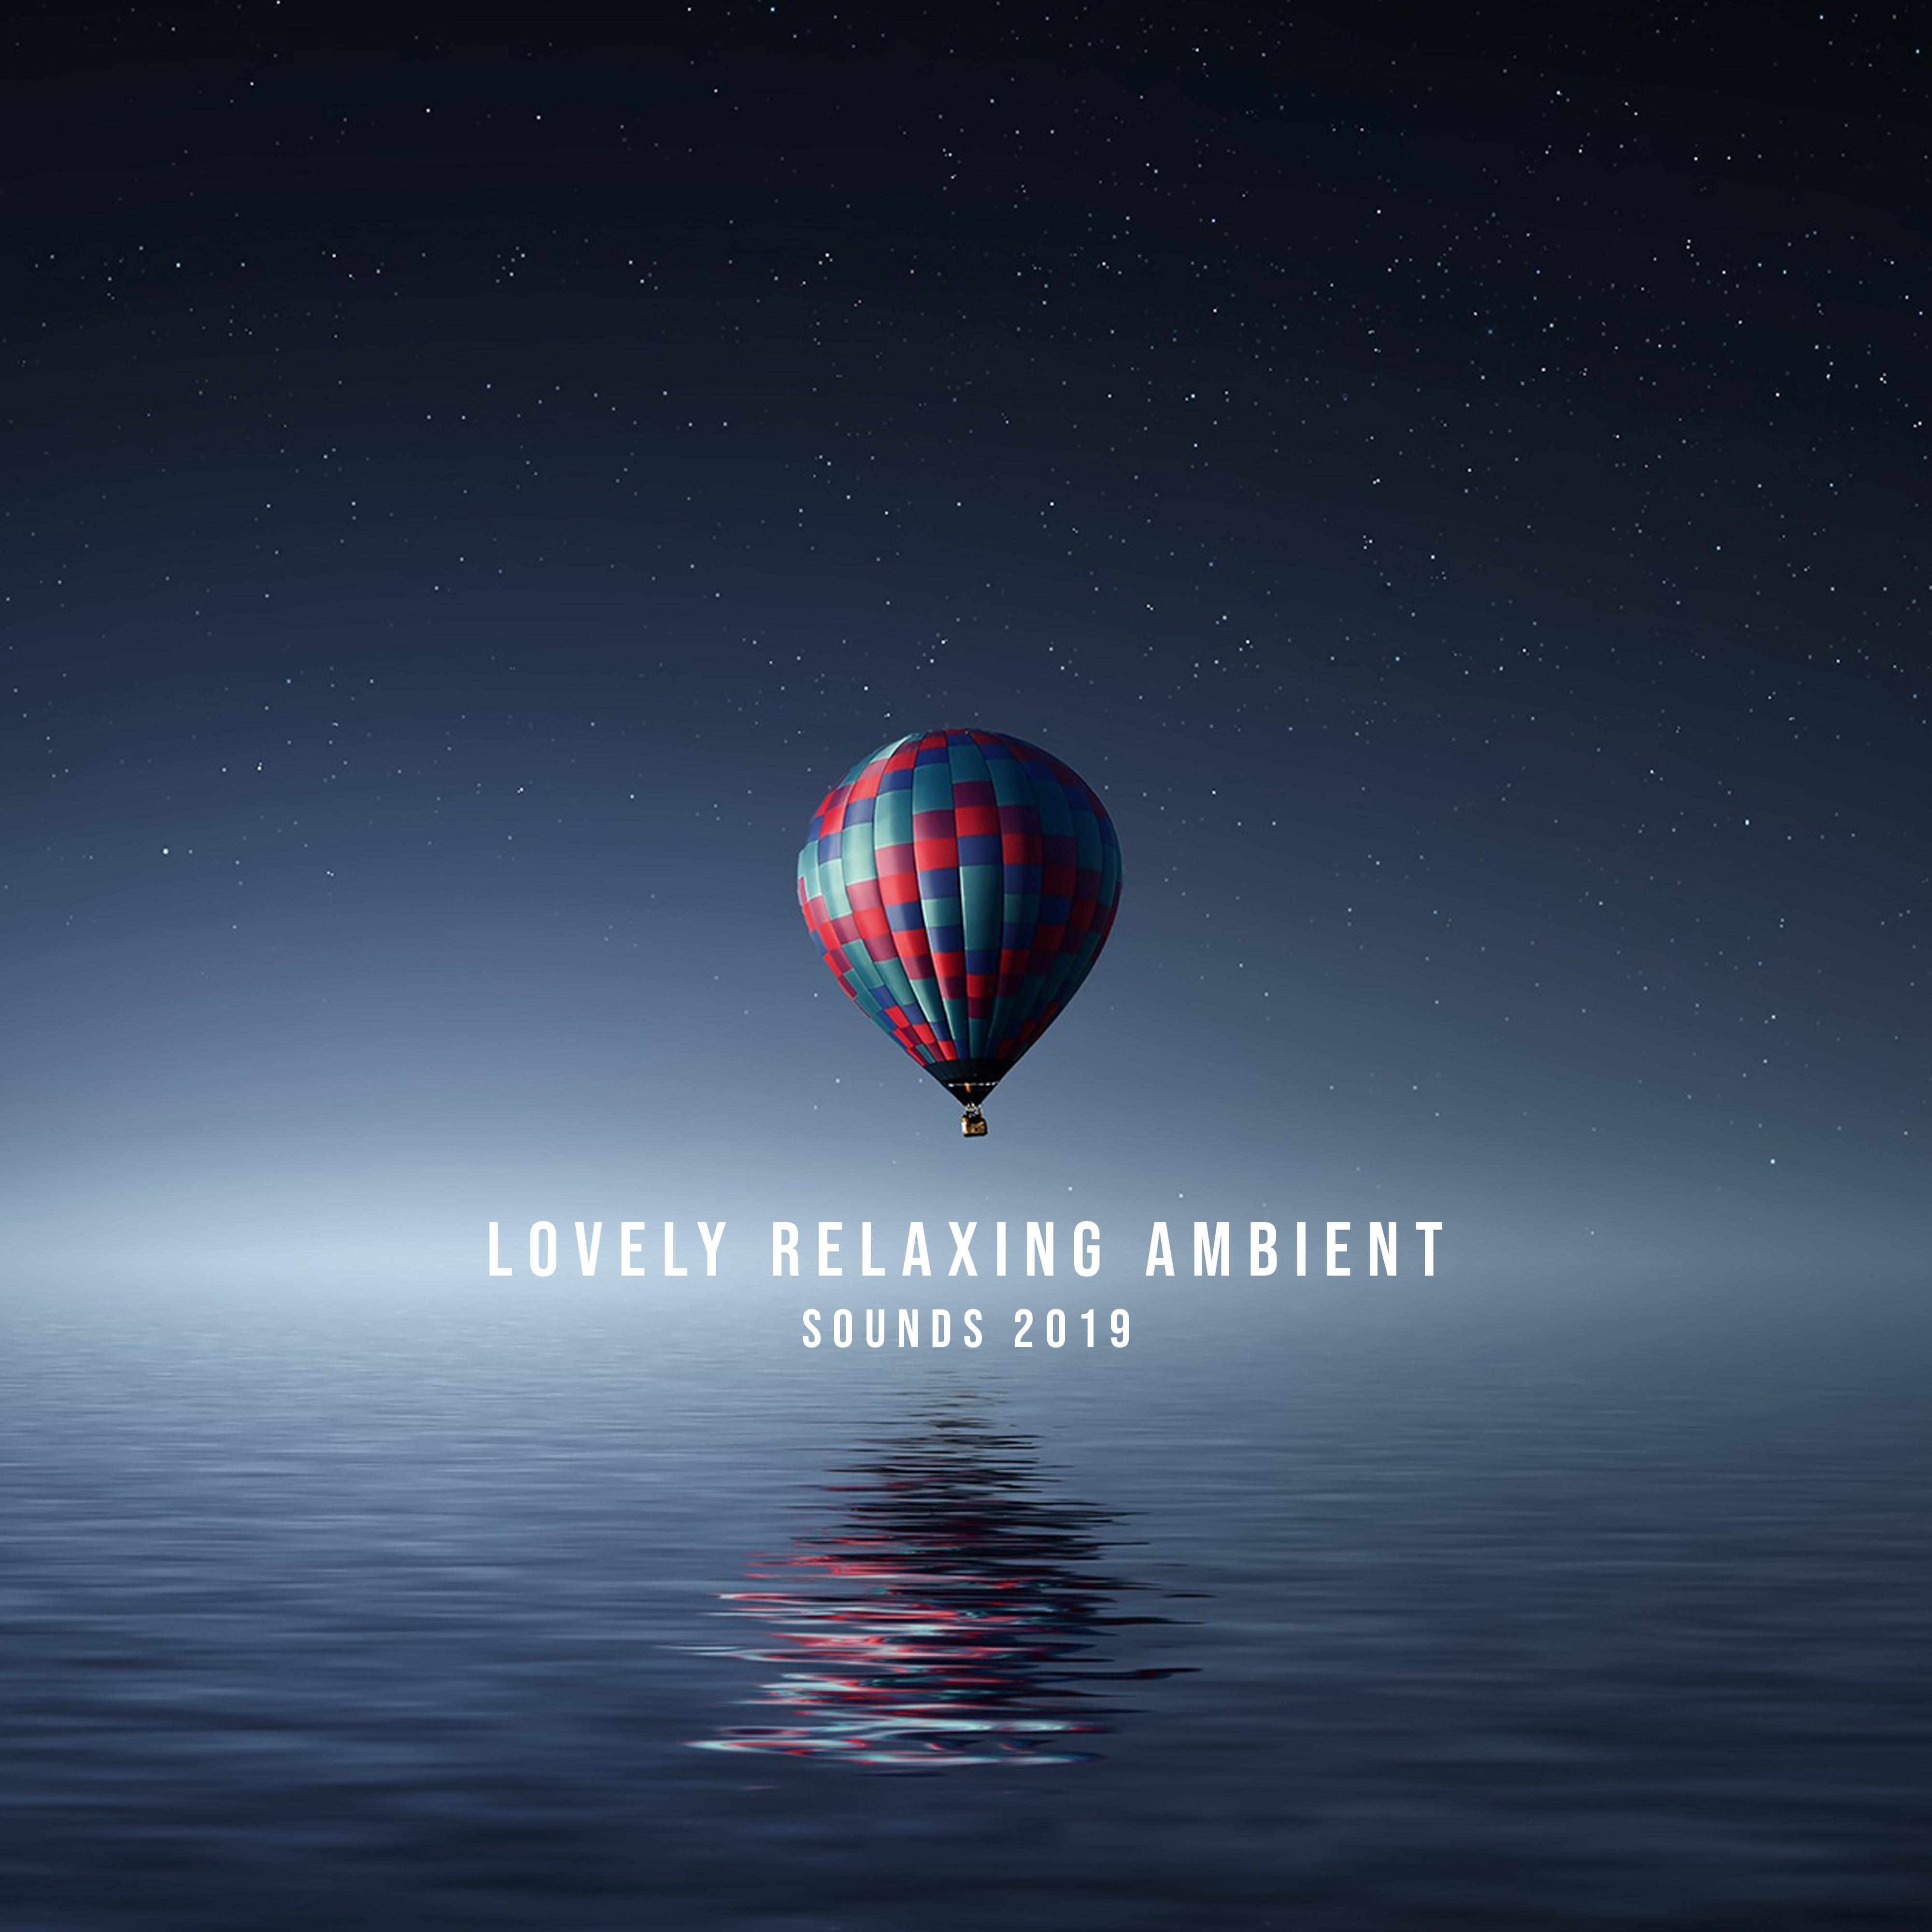 Lovely Relaxing Ambient Sounds 2019  15 New Age Songs for Total Relaxation, Calming Down, Stress Relief, Rest After Tough Day, Soothing Sounds of Violin, Sax  Many More